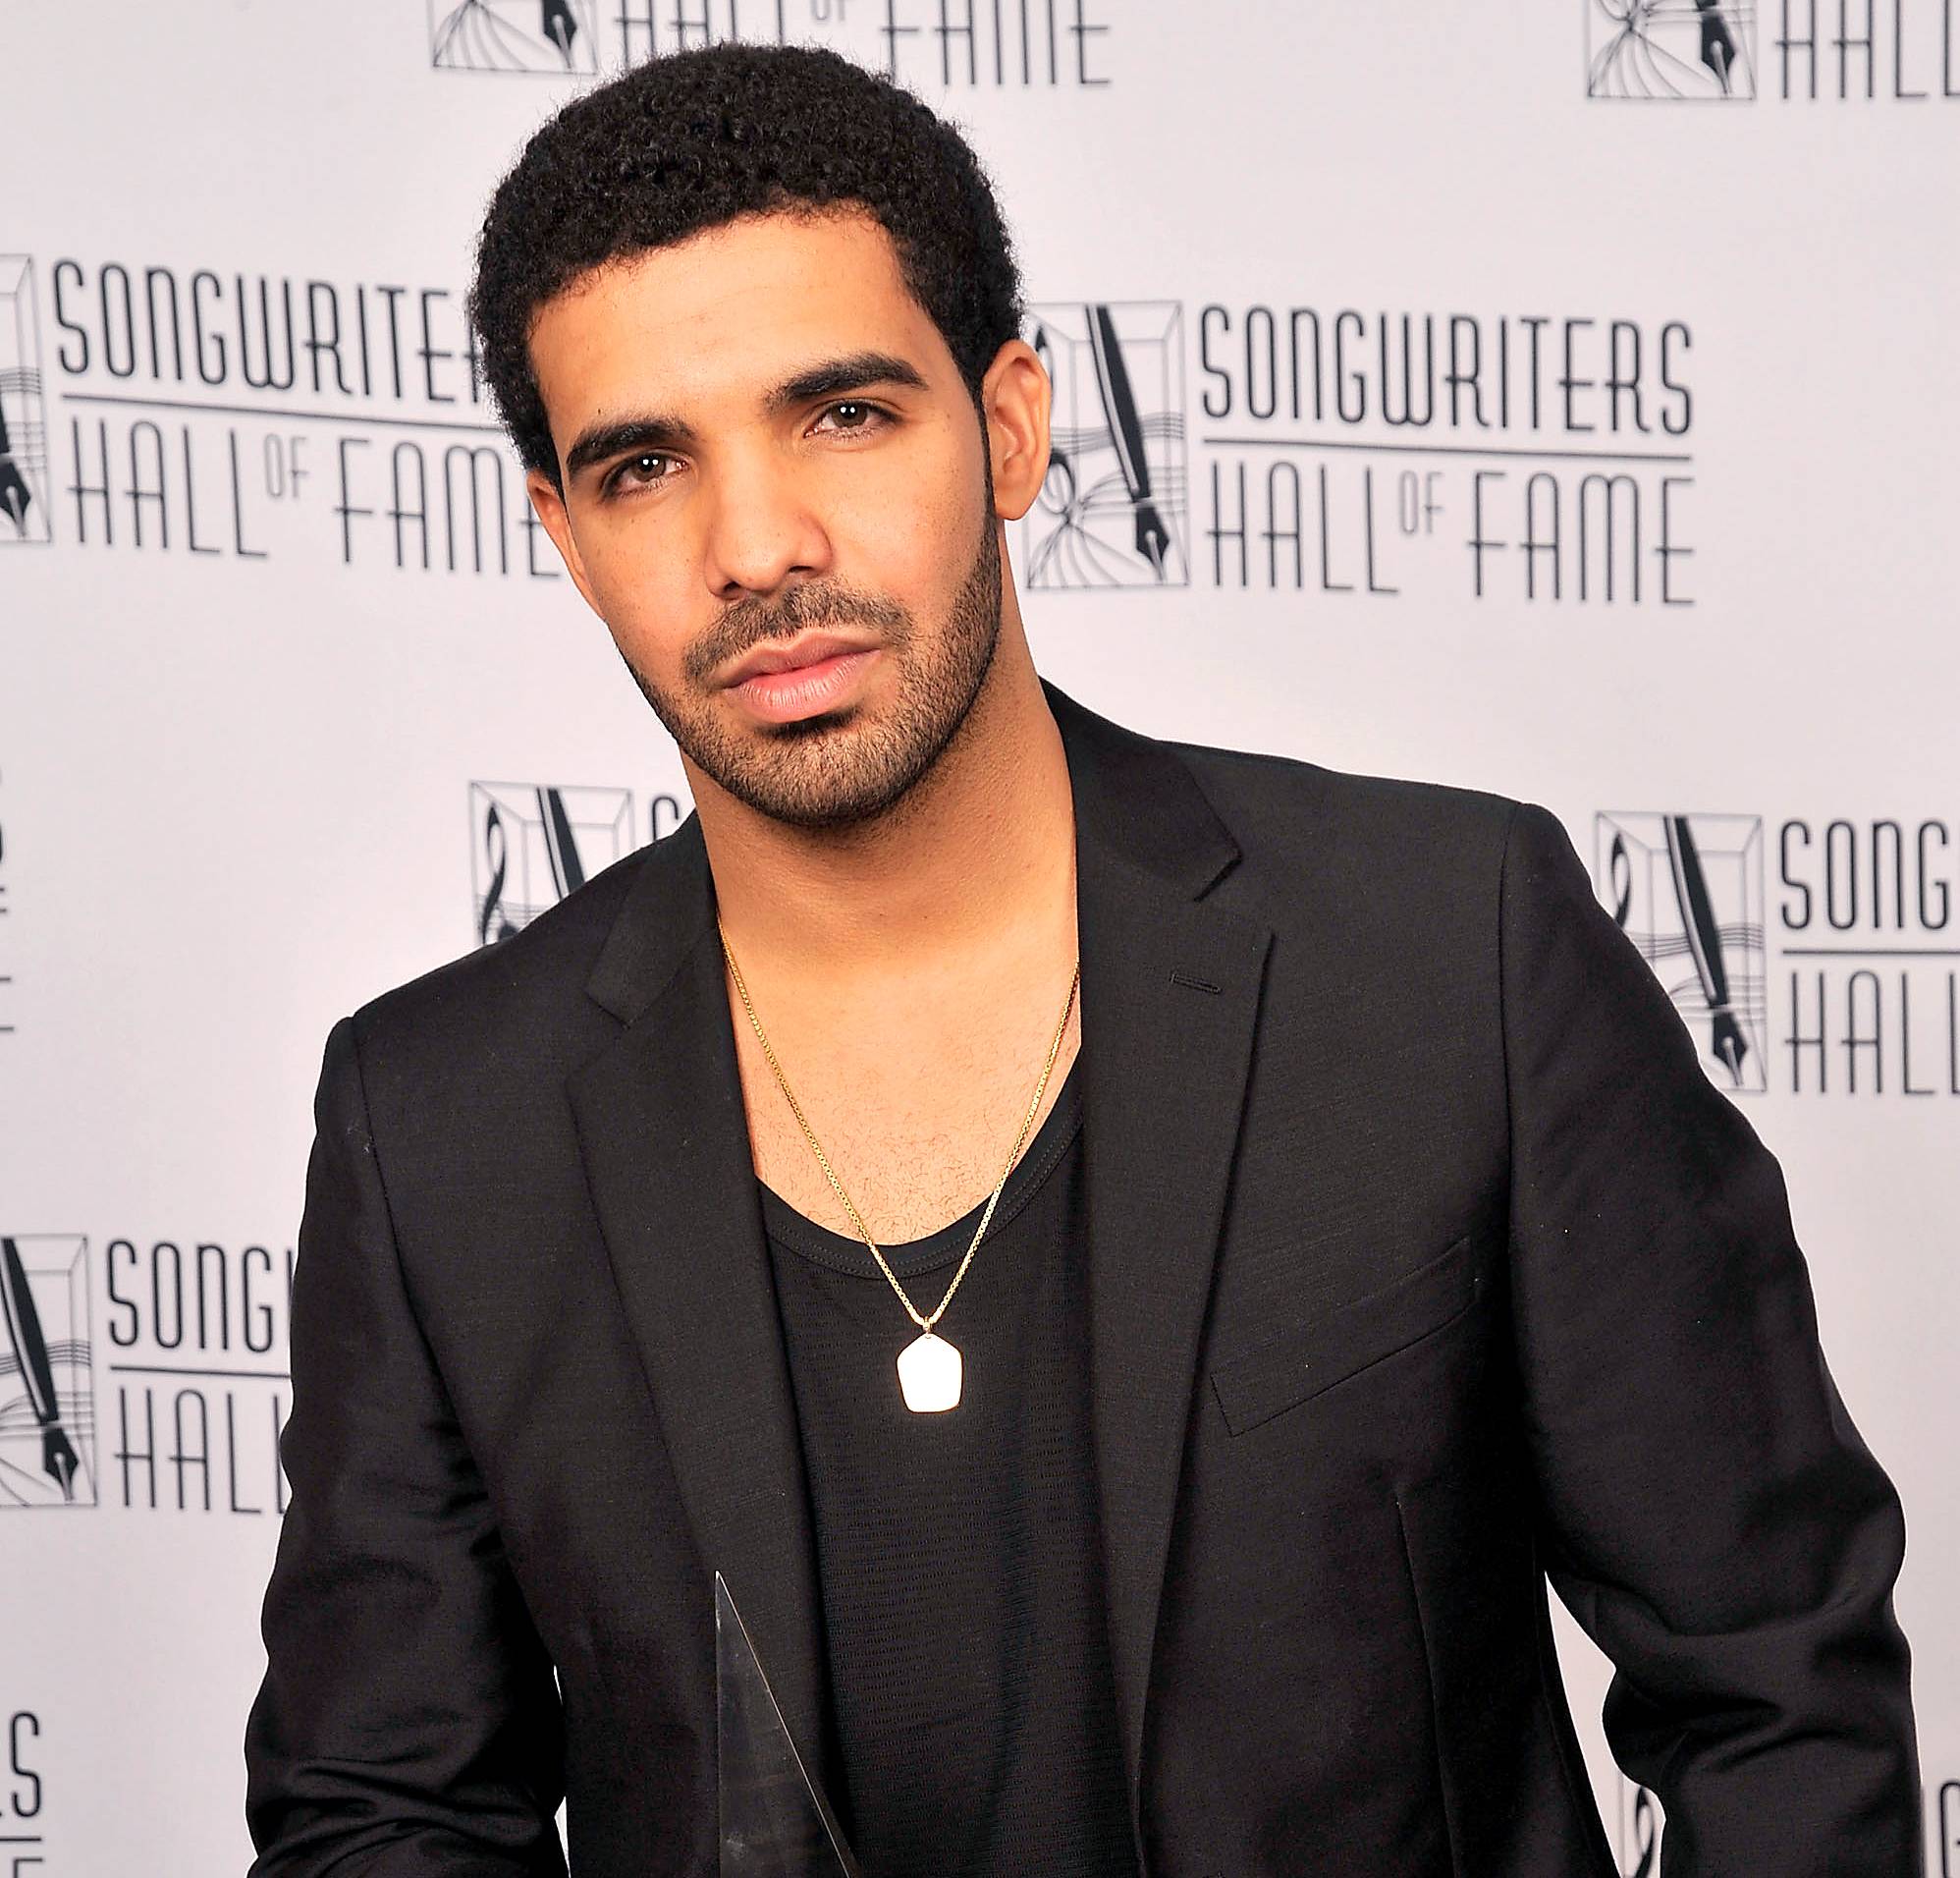 Drake (@Drake)&nbsp;  - TWEET: &quot;Platinum. Now THAT'S Sweet!&quot;&nbsp;After hearing that his album Take Care had gone platinum, Drake tweets a message that alludes to Common's song &quot;Sweet,&quot; which is about singing rappers. The tweet was promptly erased after it was sent.&nbsp;(Photo: Gary Gershoff/Getty Images for Songwriters Hall of Fame)